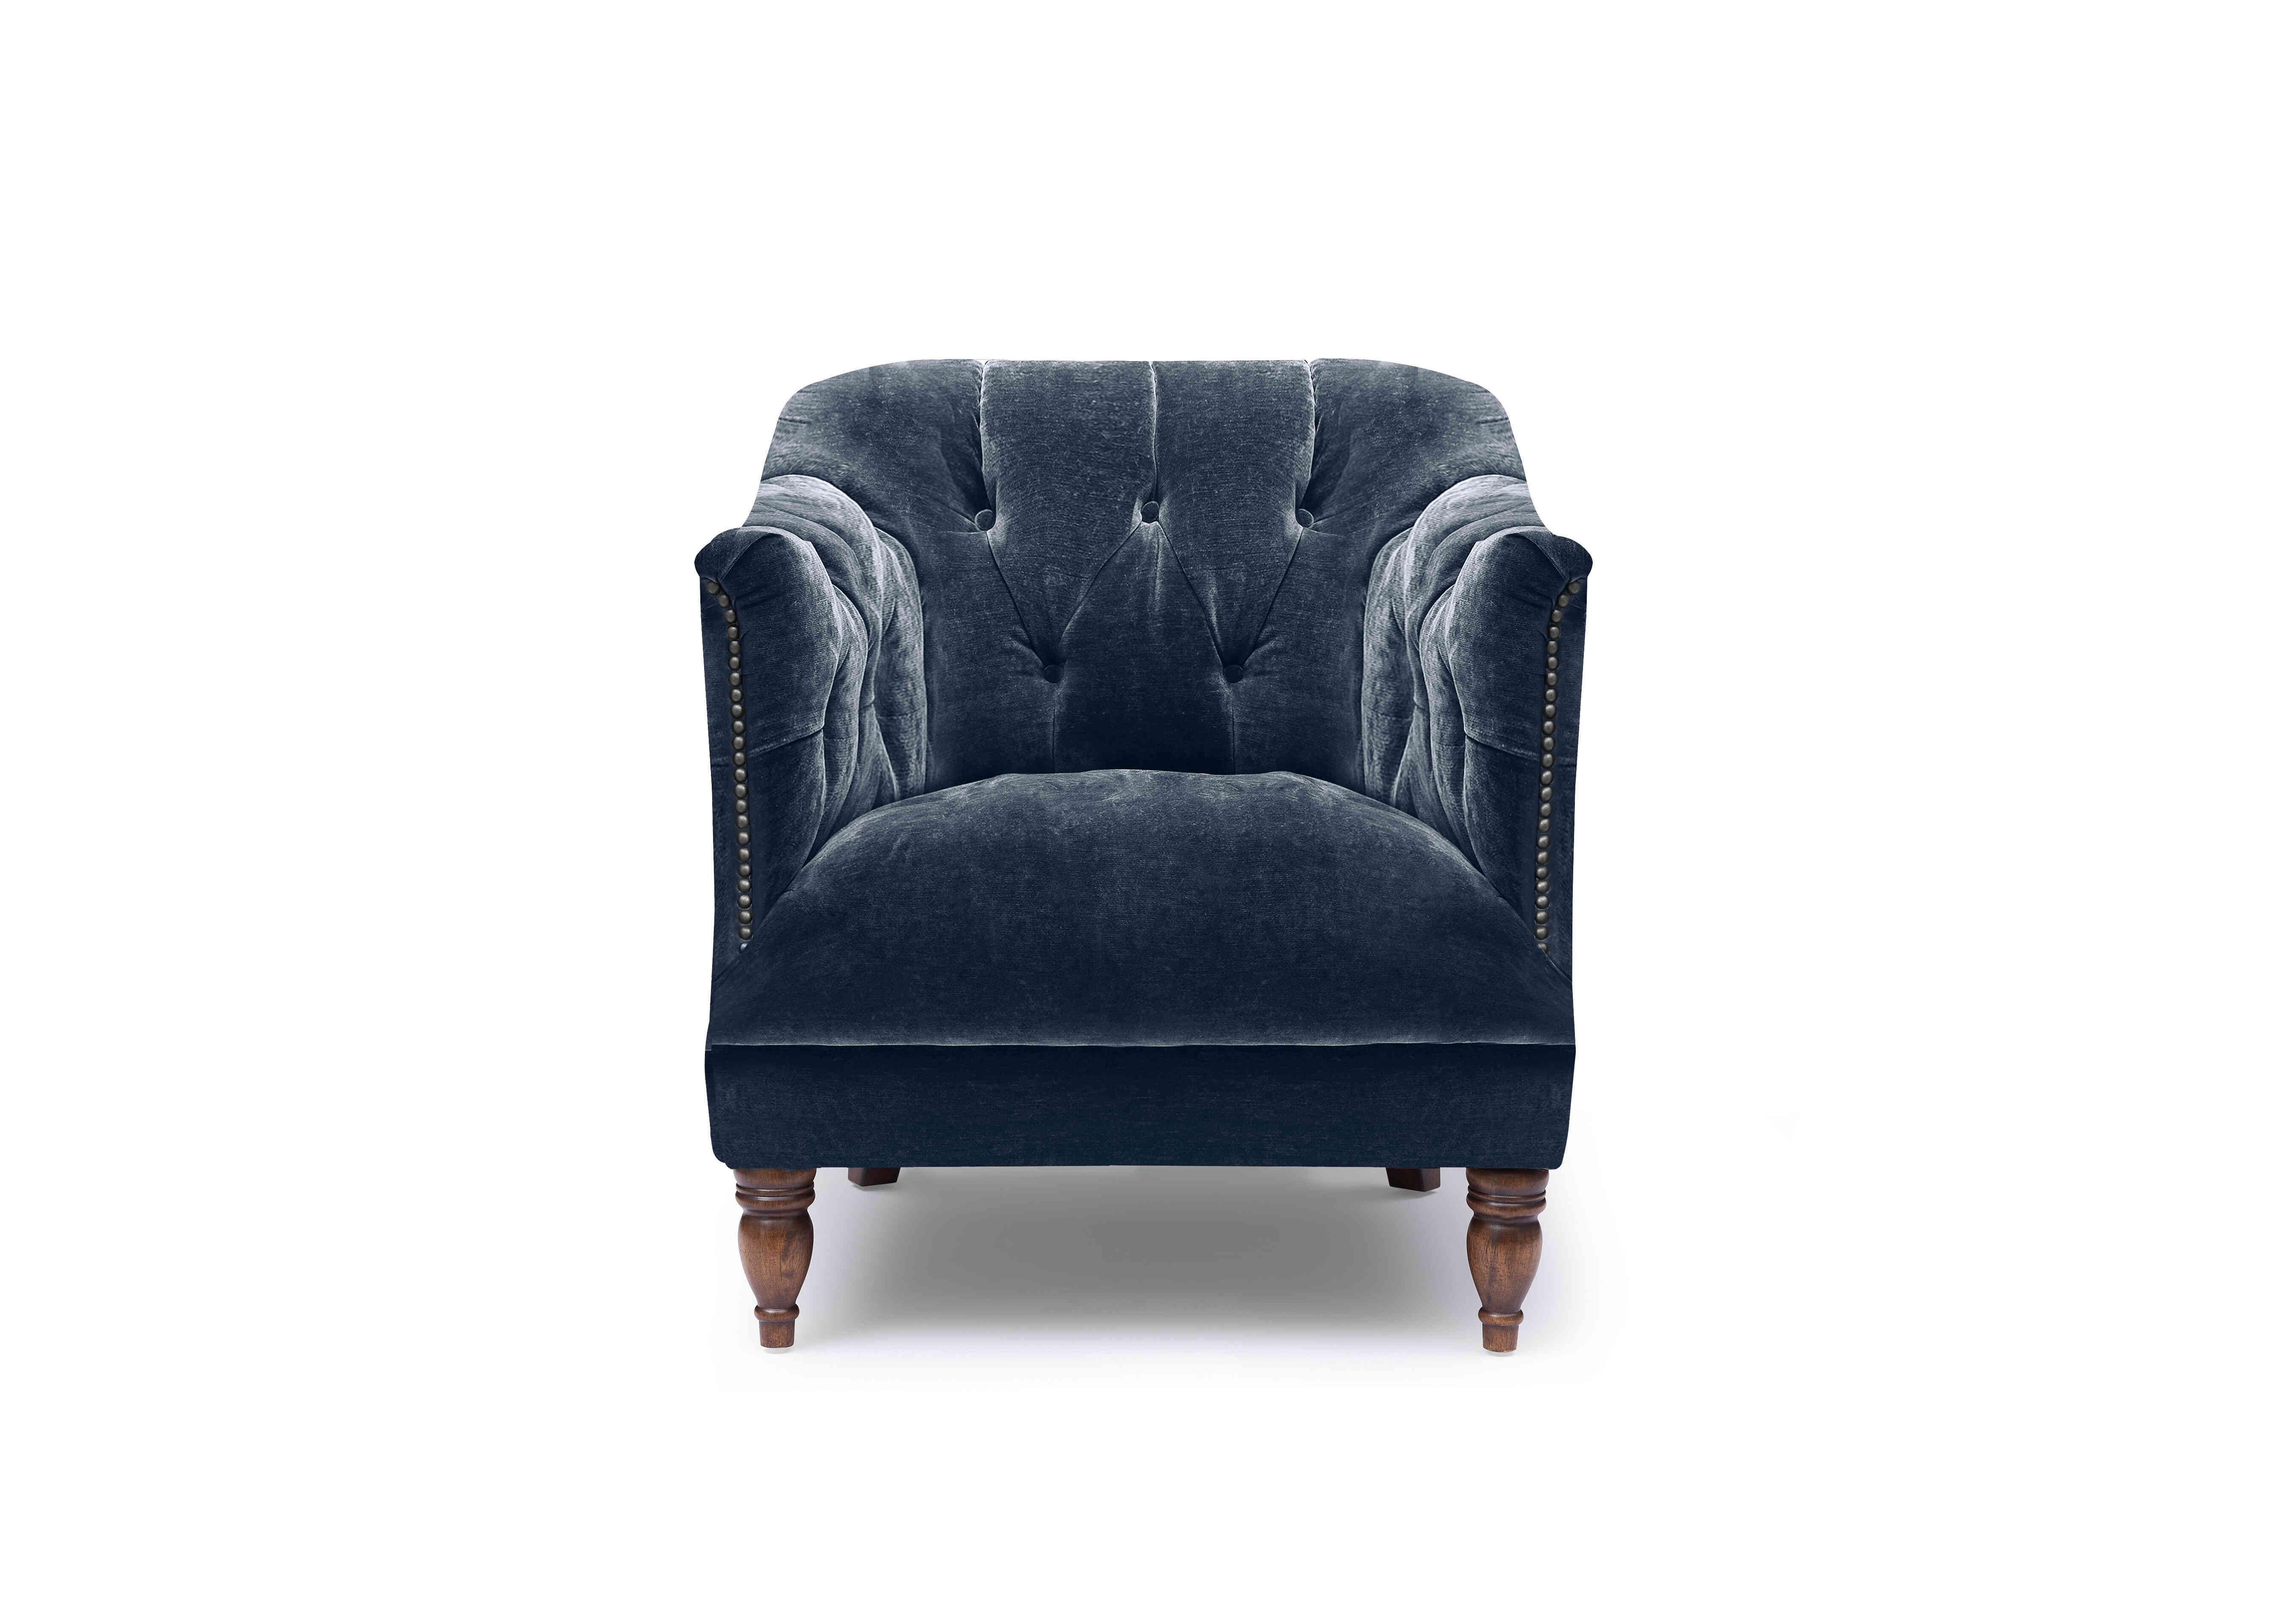 Henson Fabric Accent Tub Chair in X3y2-W024 Midnight on Furniture Village